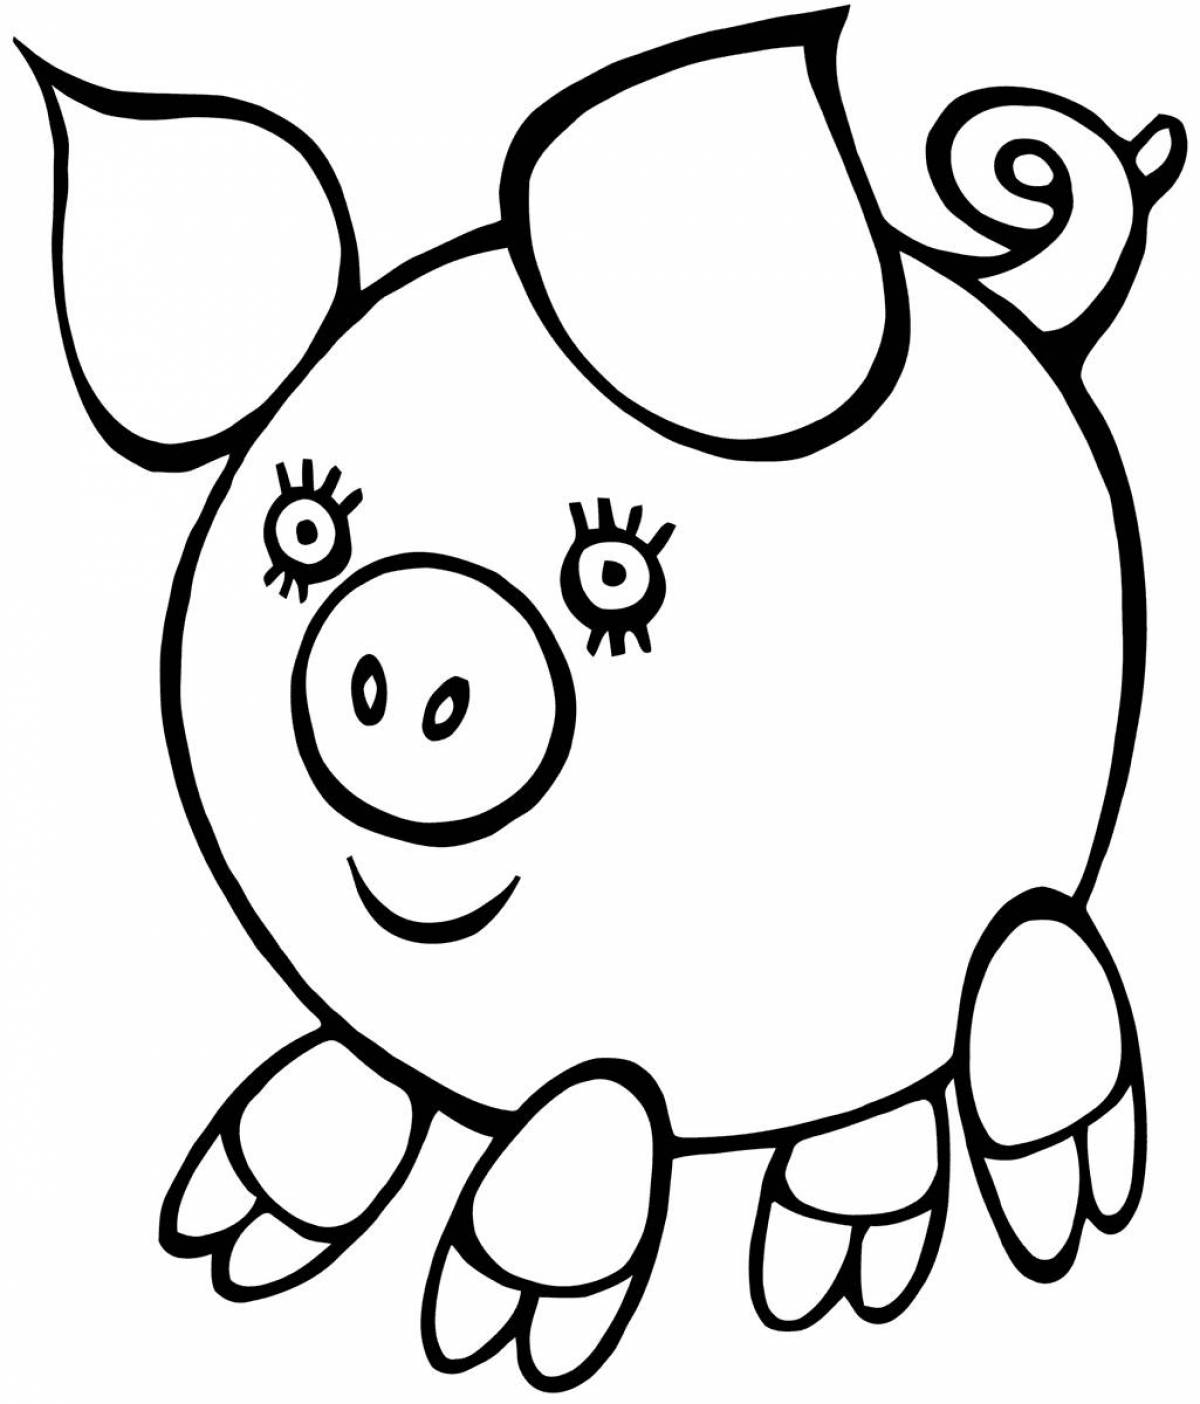 Color-frenzy coloring page for babies 2-3 years old